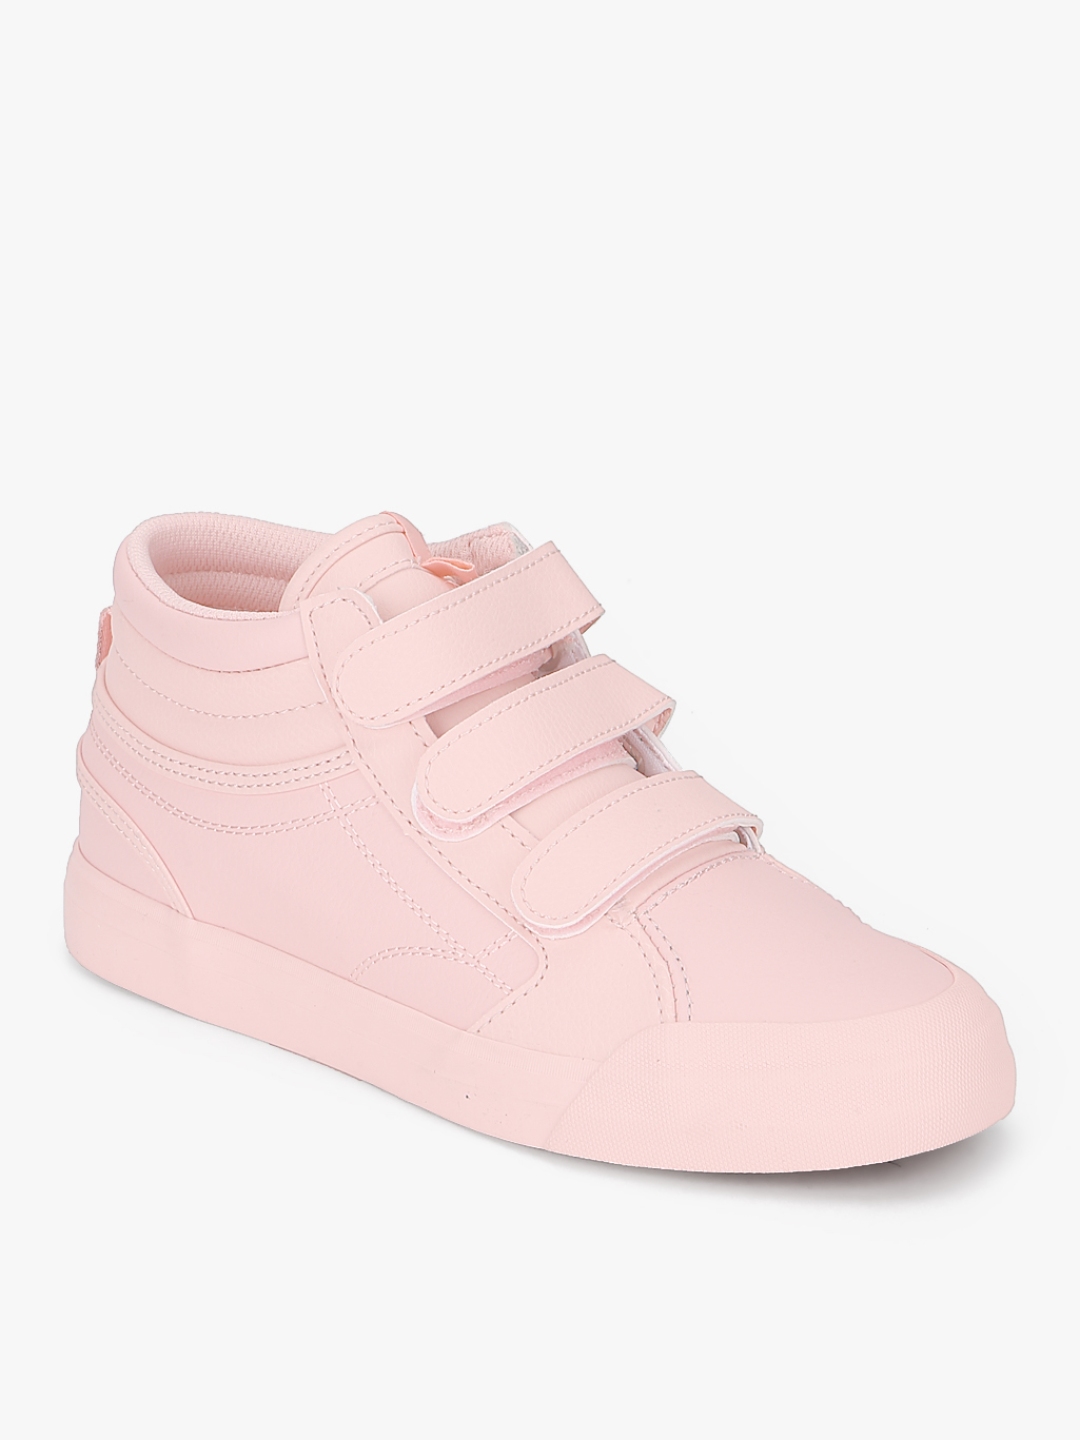 Buy Peach Sneakers - Casual Shoes for Women 7220335 | Myntra